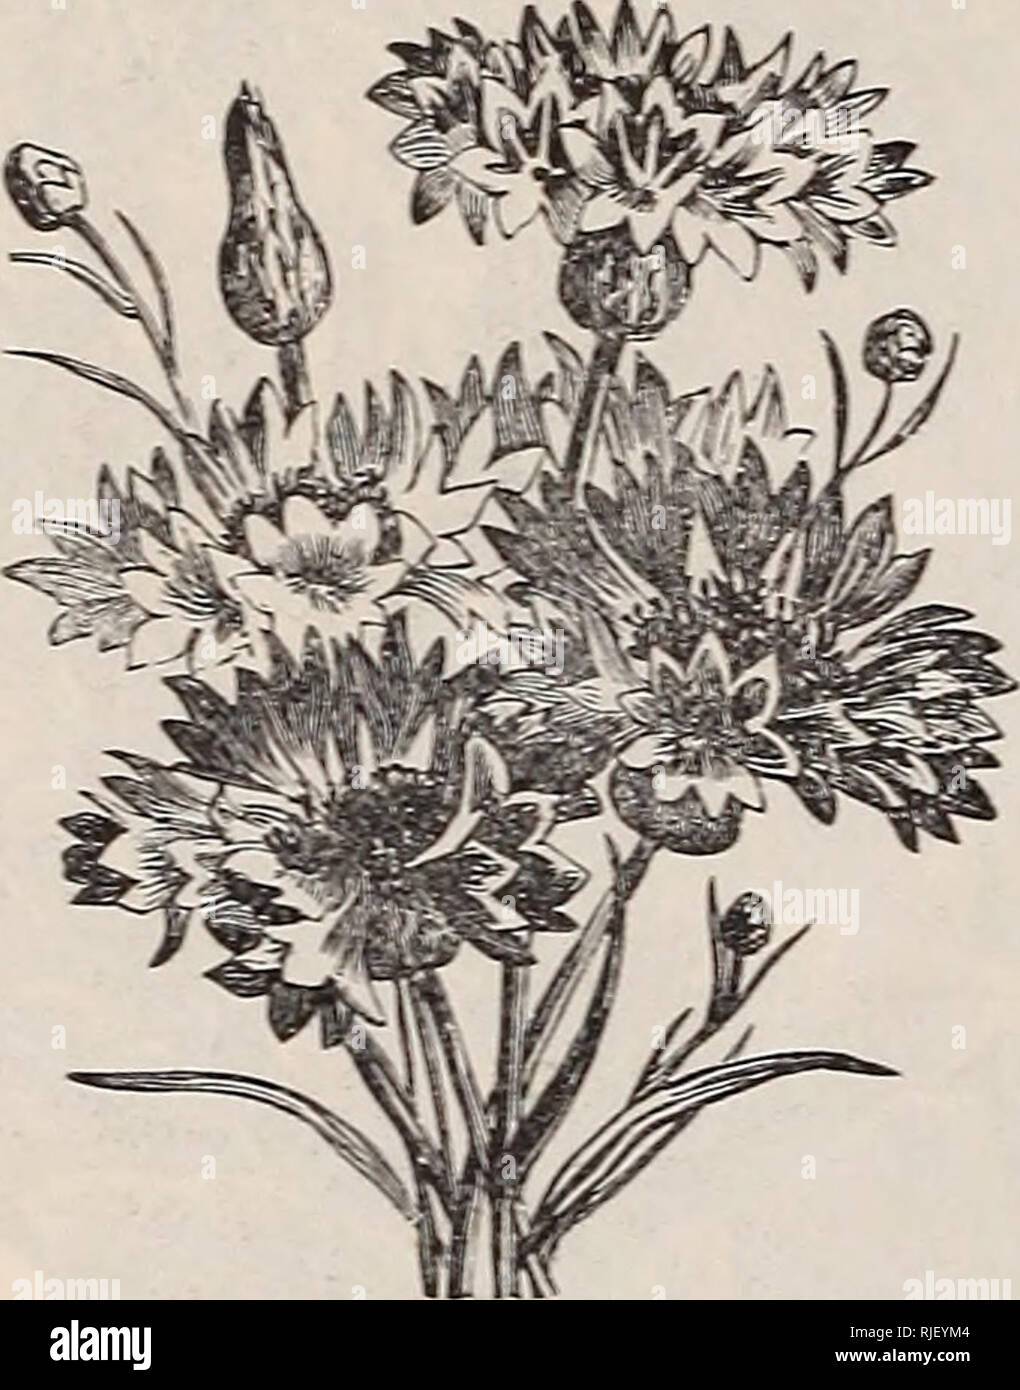 . Catalogue of vegetable, field, and flower seeds, 1895. Nursery stock New York (State) New York Catalogs; Vegetables Seeds Catalogs; Flowers Seeds Catalogs. 28 CHAS. SCHWAKE, 404 E. 34th STREET, N. Y. Carnations (Dianthus). It is not neces- sary to lose any words about their beauty. Sow in pots, and after they are strong enough, plant them in the open ground. Barbatus, Sweet William. Pkt., 10c. Imperialis, fl. pi., finest mixed, double, Pkt., 5c. Margaritae, fl. pi., true, double. Pkt., 15c. Celosia (Cockscomb). Pretty as pot and group plants, they are beautiful if nicely grown. Cristata nana Stock Photo